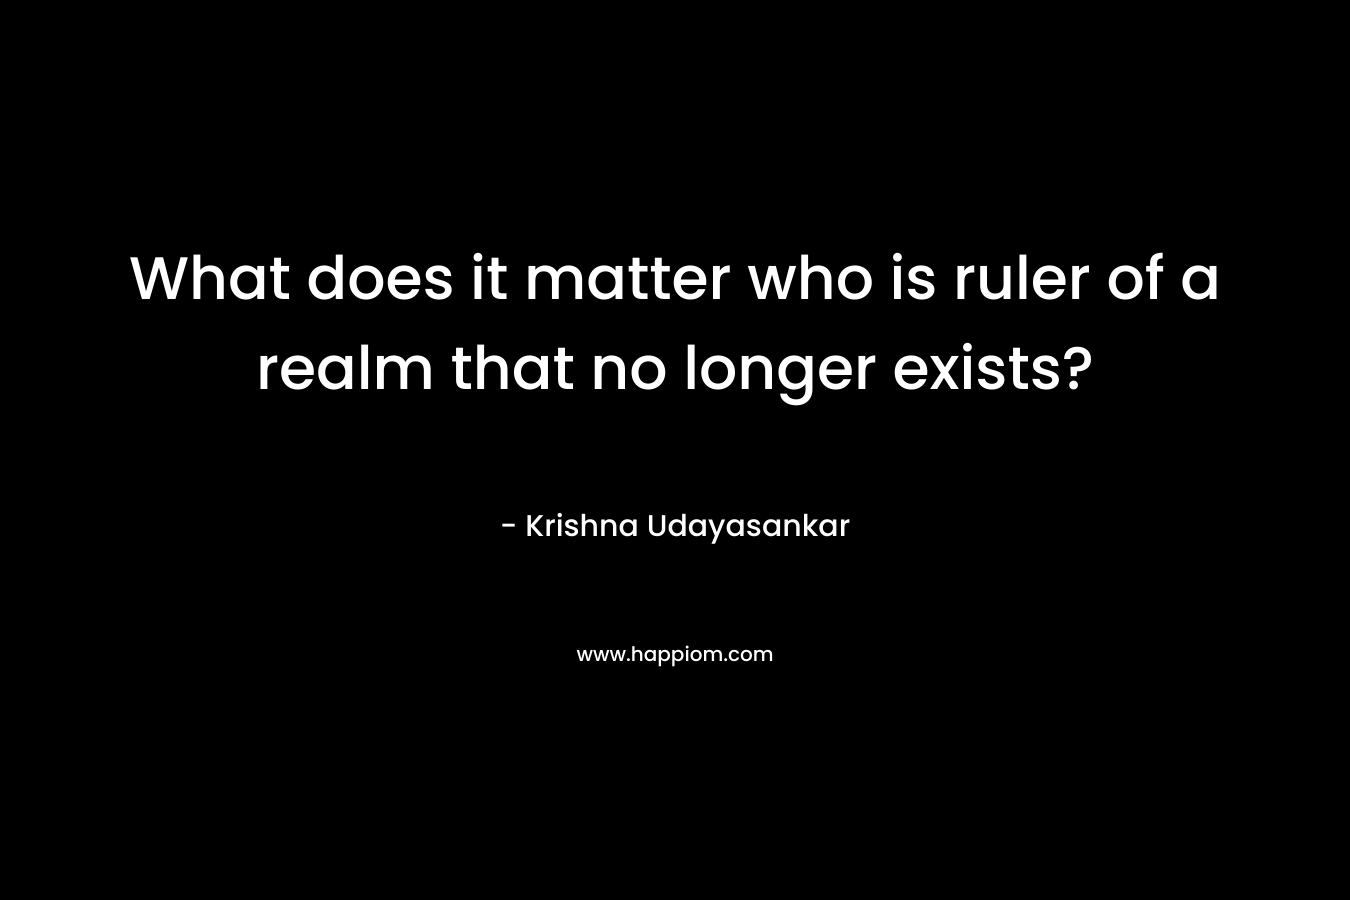 What does it matter who is ruler of a realm that no longer exists?